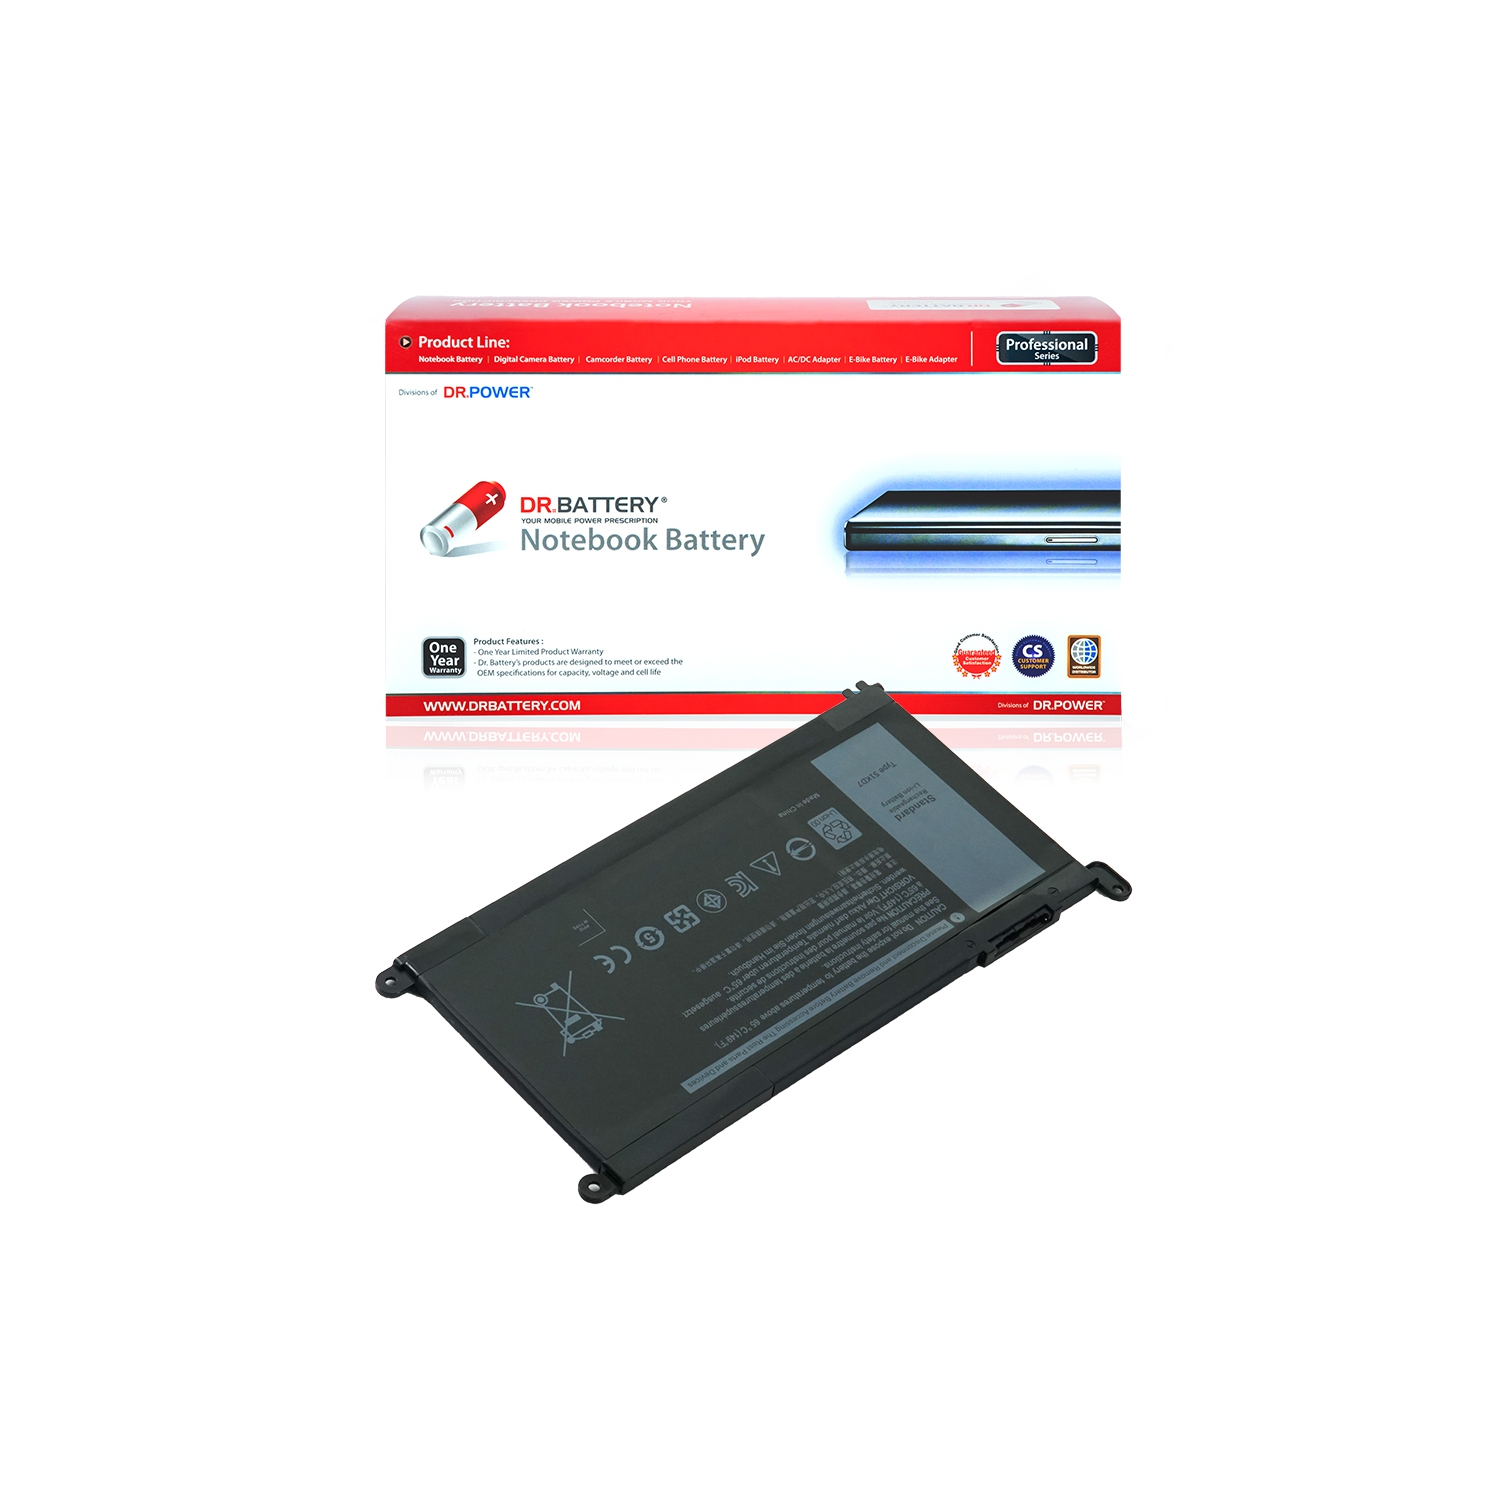 DR. BATTERY - Replacement for Dell Chromebook 11 Chromebook 11 3189 / Chromebook 3189 Education 2-in-1 / 3180 / 51KD7 / FY8XM